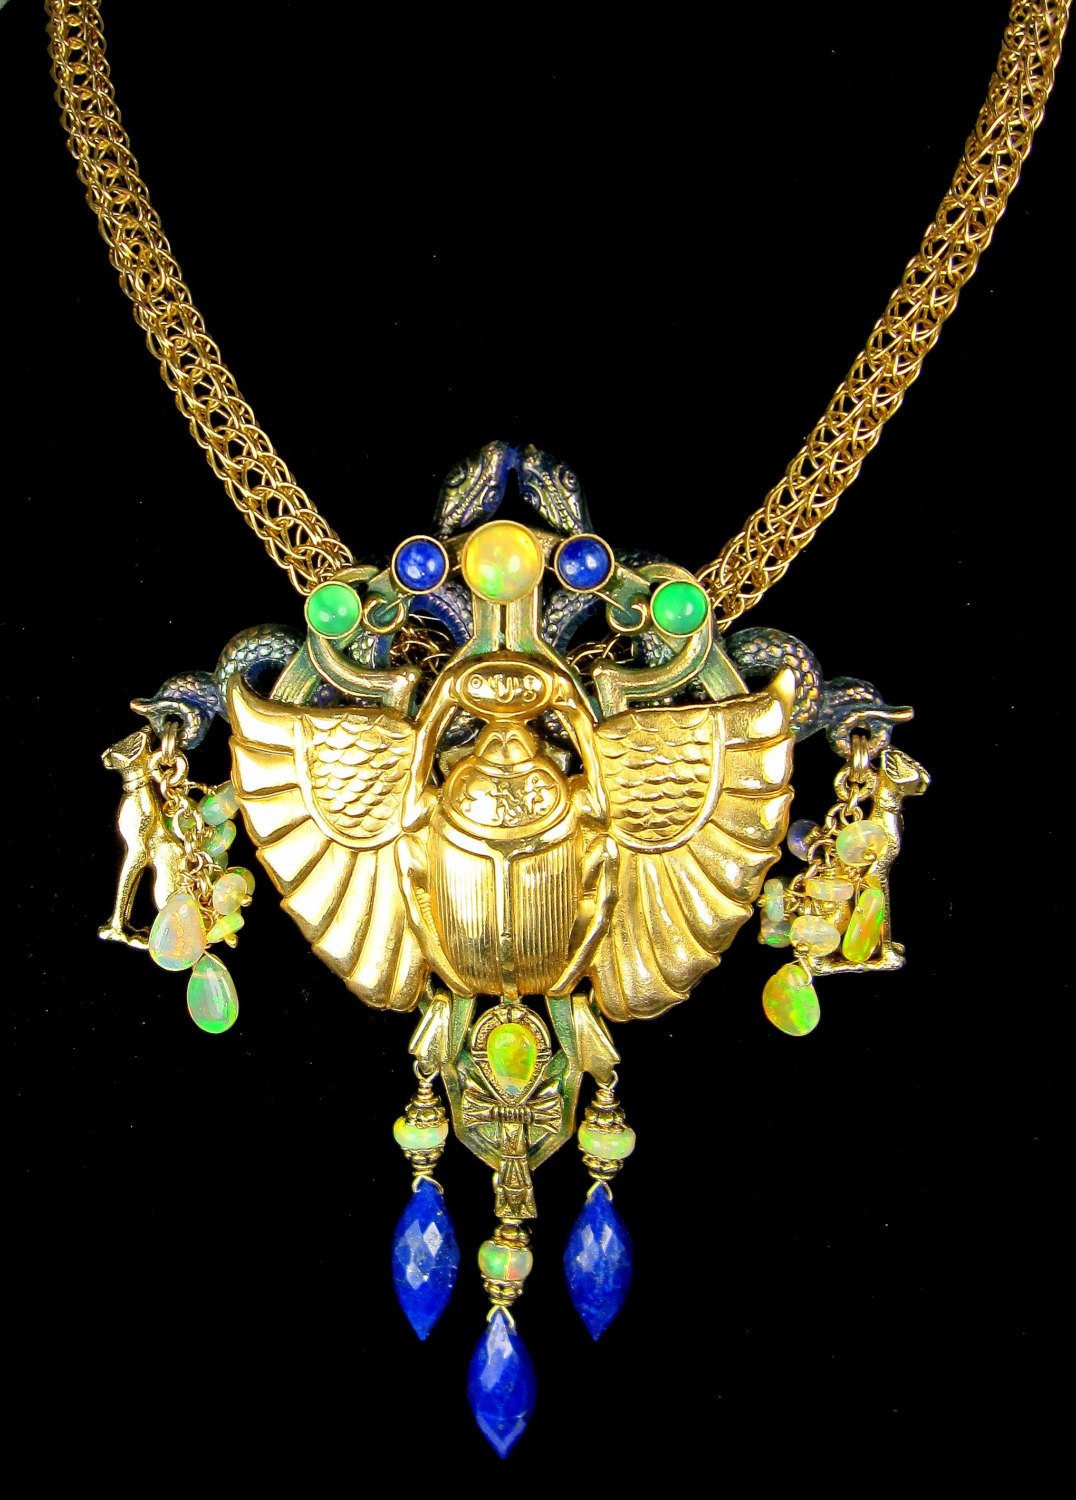 Ancient Egyptian Jewelry Wallpapers High Quality | Download Free